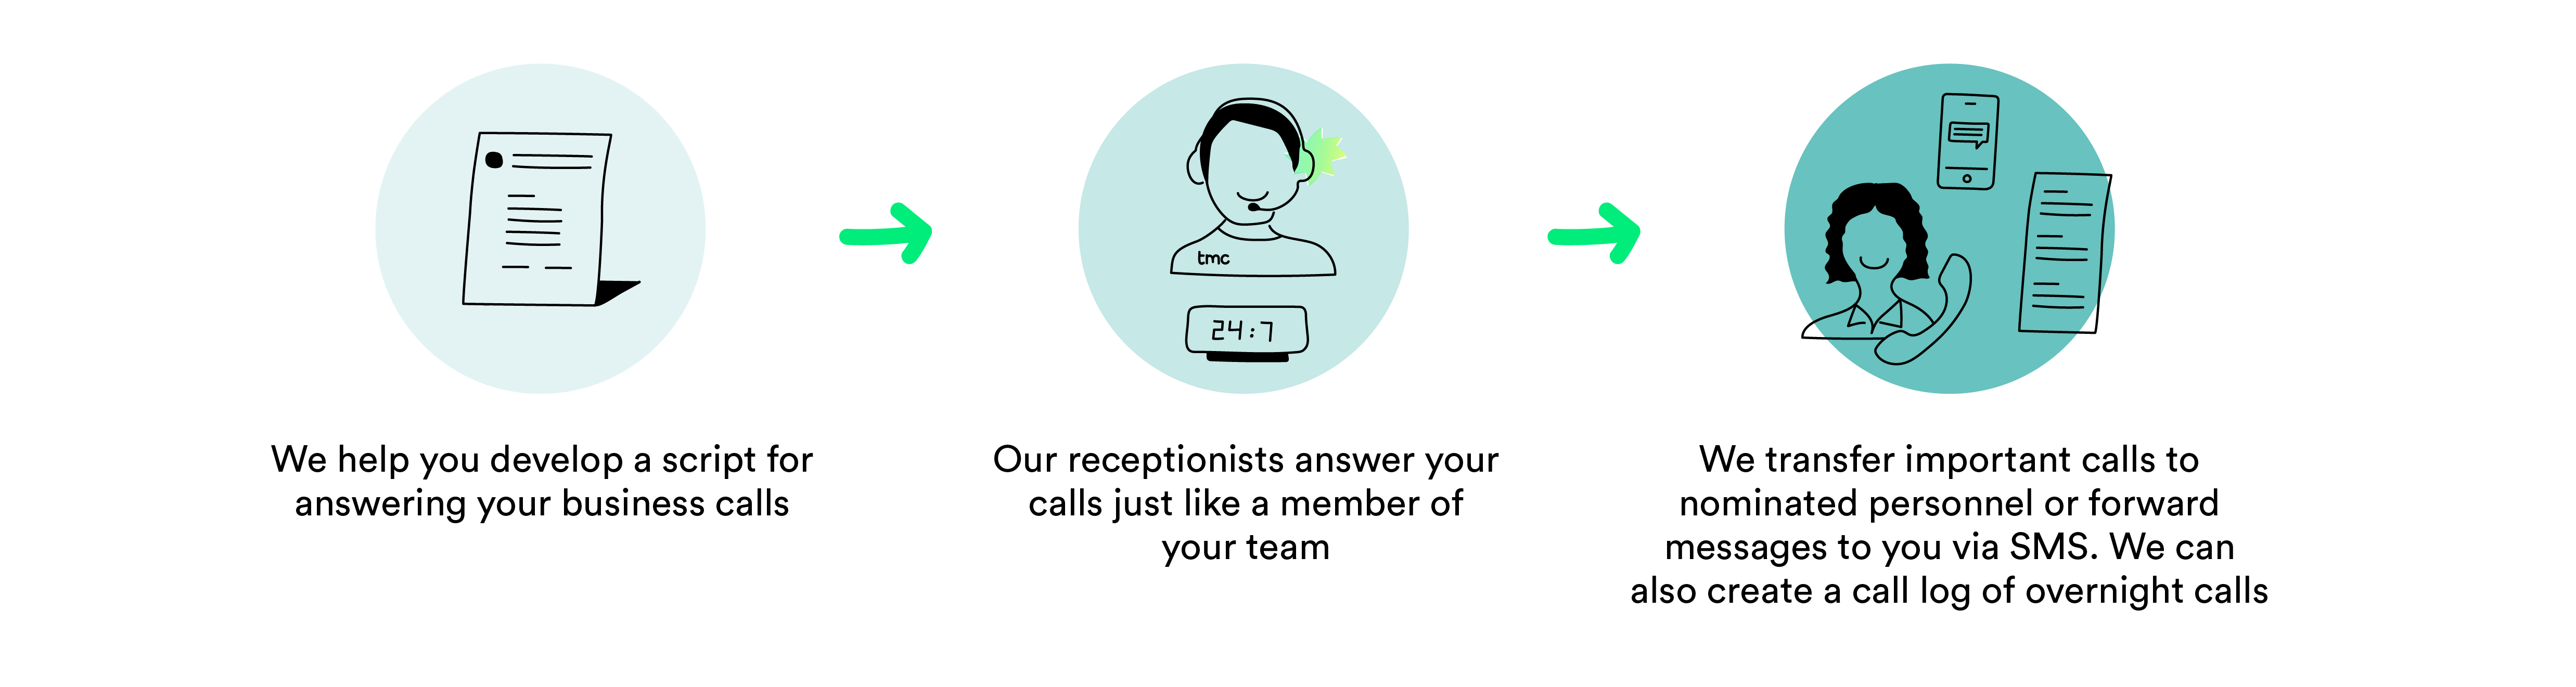 Image of our virtual reception services in 3 simple steps